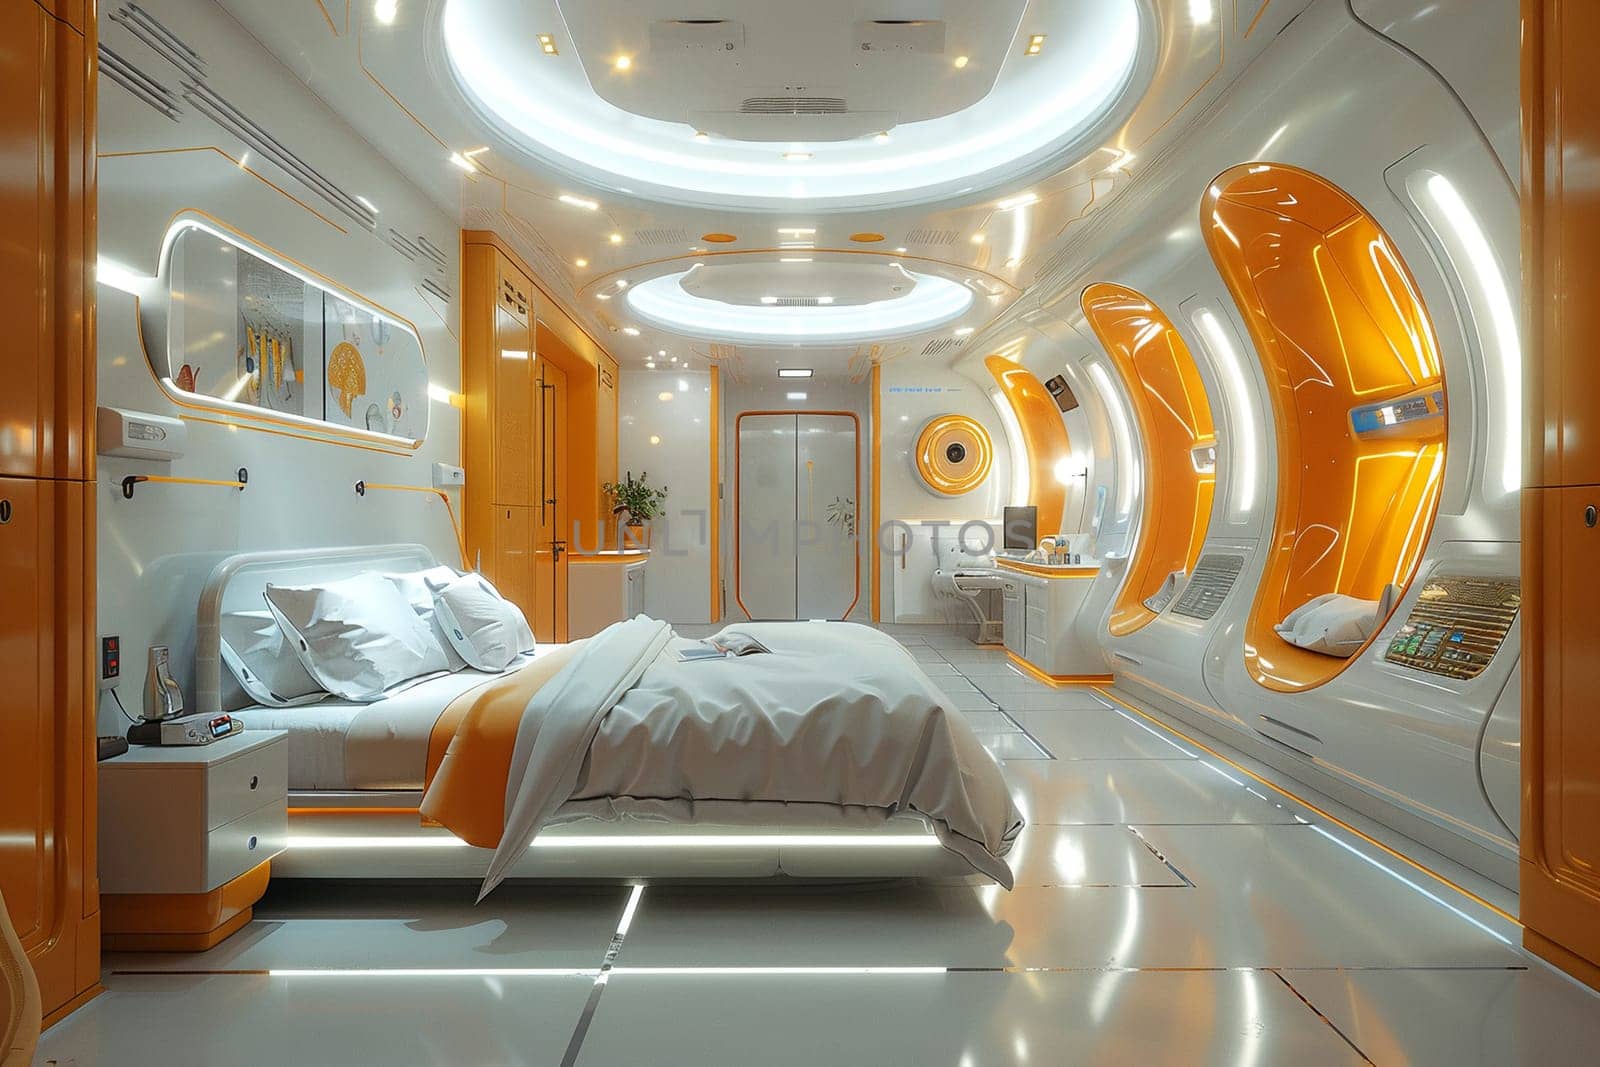 Futuristic hospital room advanced technology, luxury design. Modern medical architecture by Yevhen89